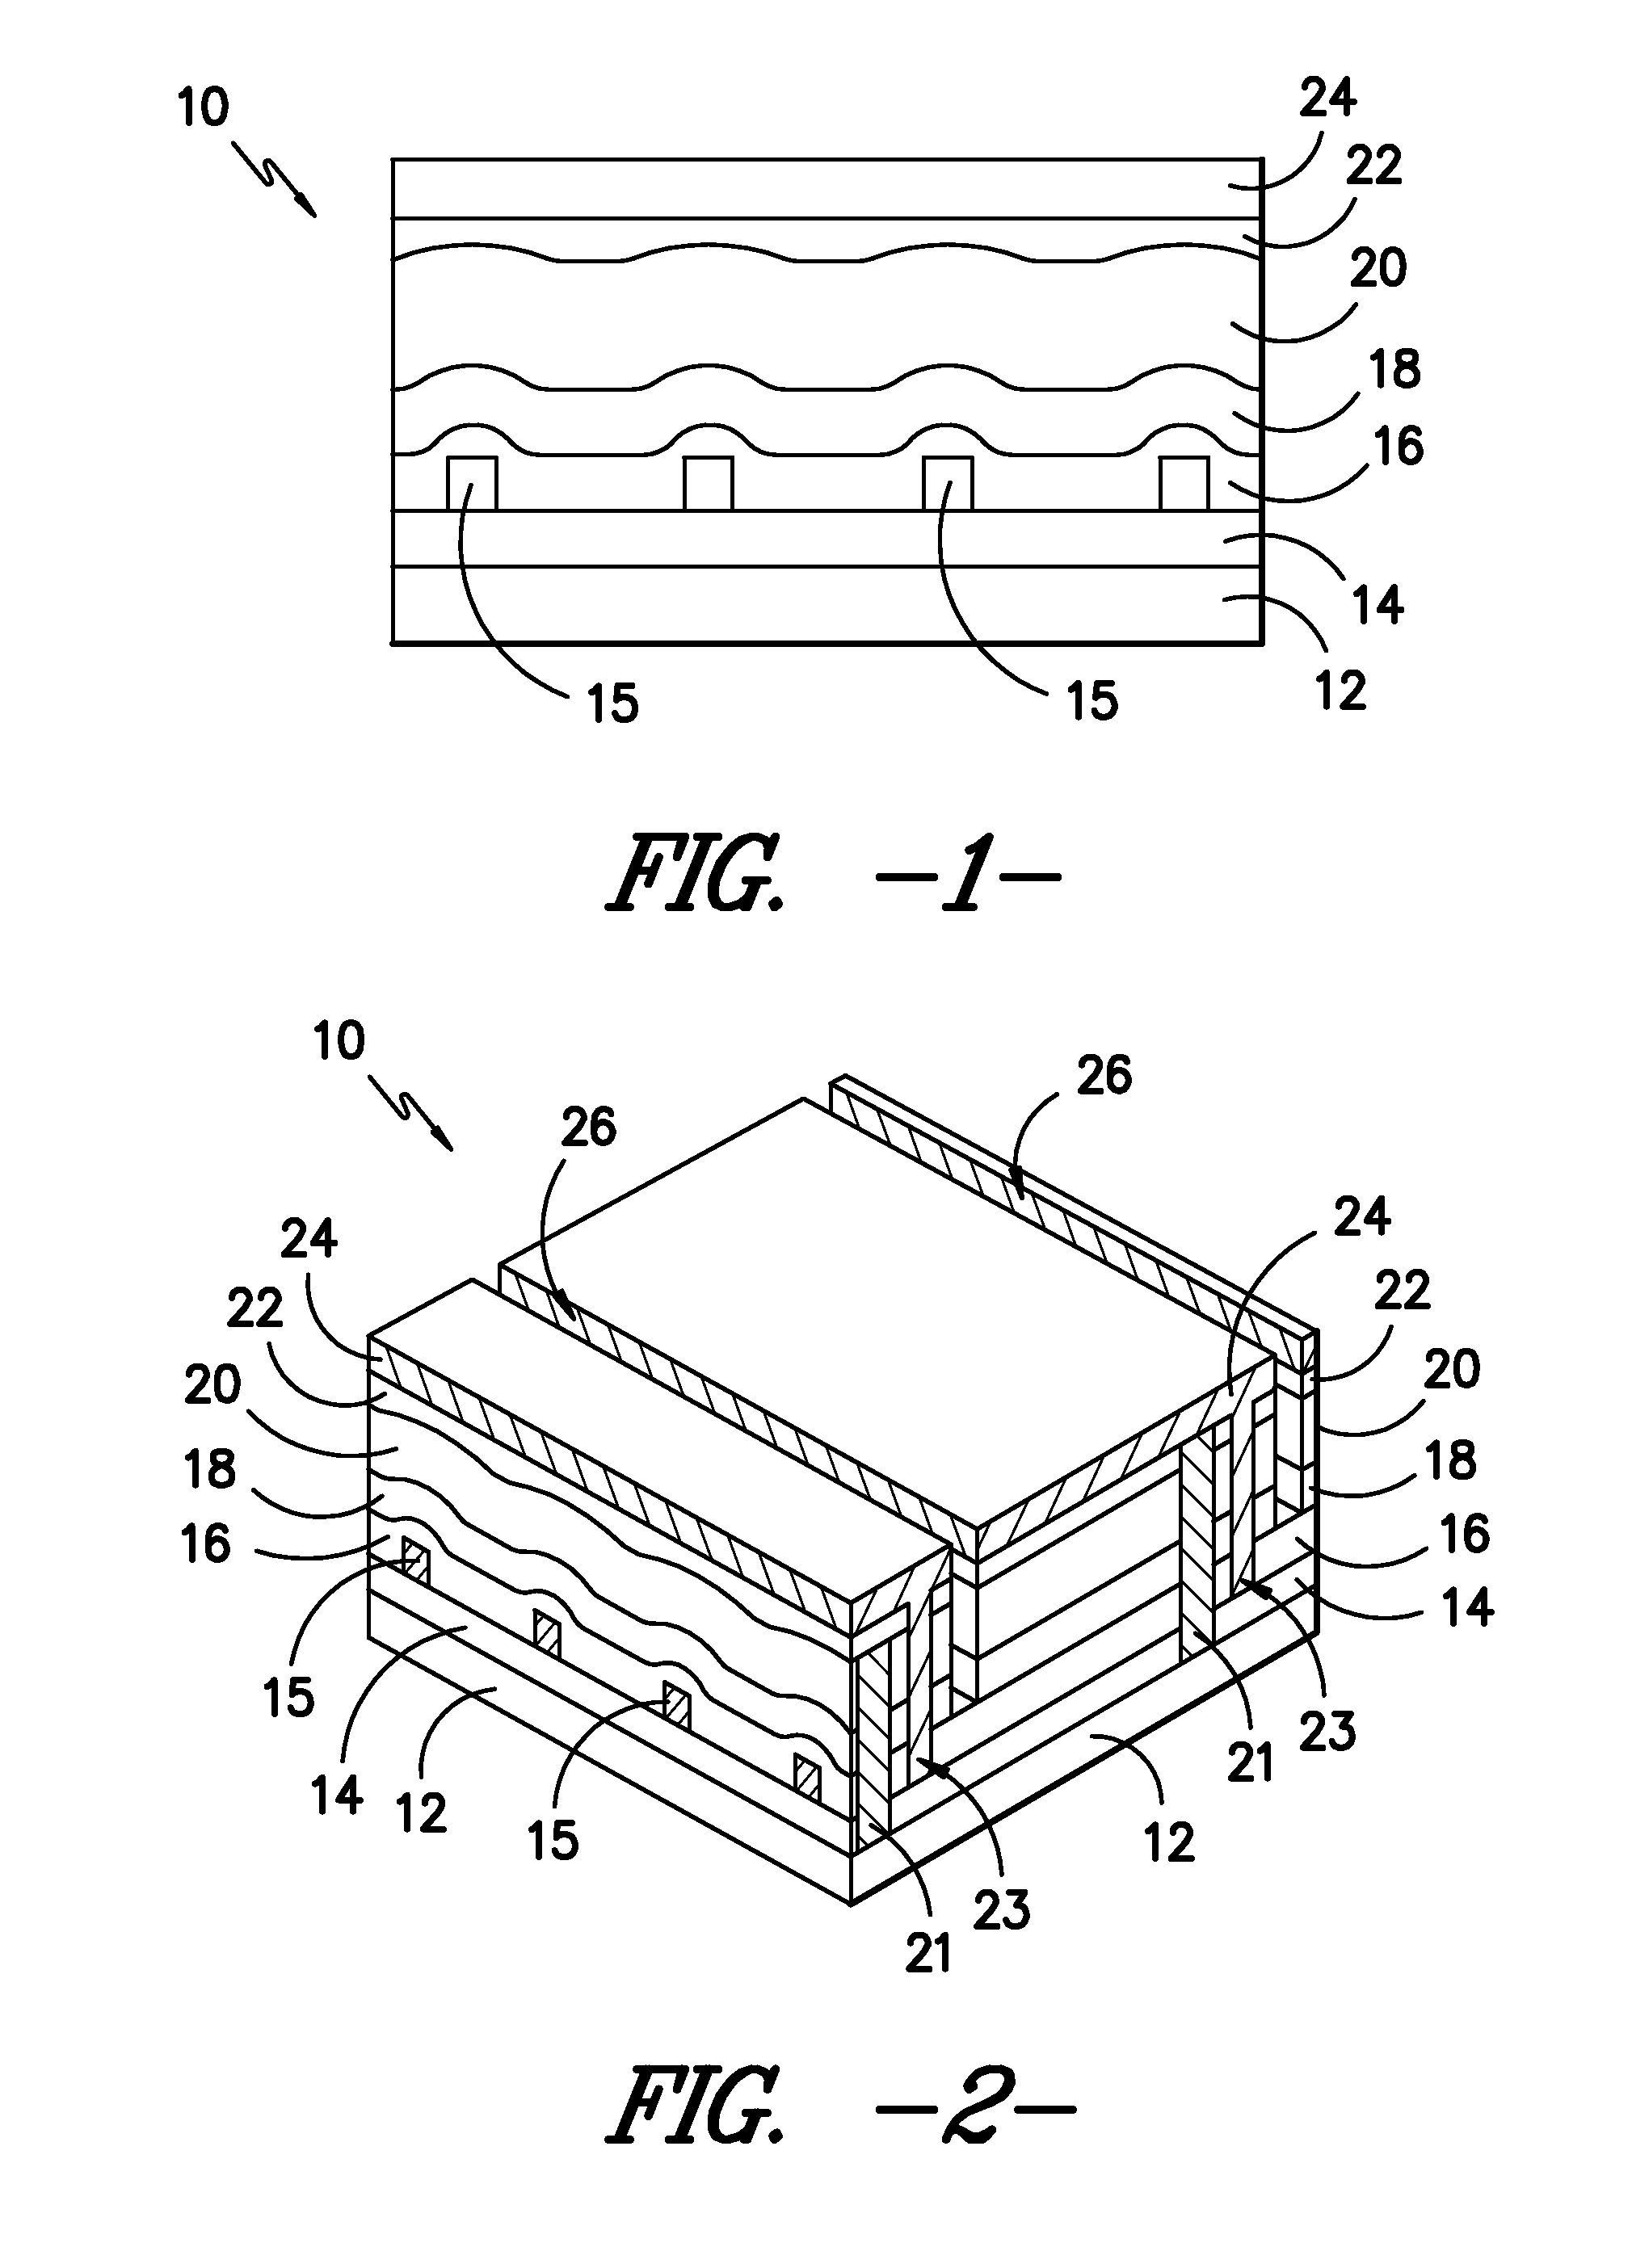 Metallic gridlines as front contacts of a cadmium telluride based thin film photovoltaic device